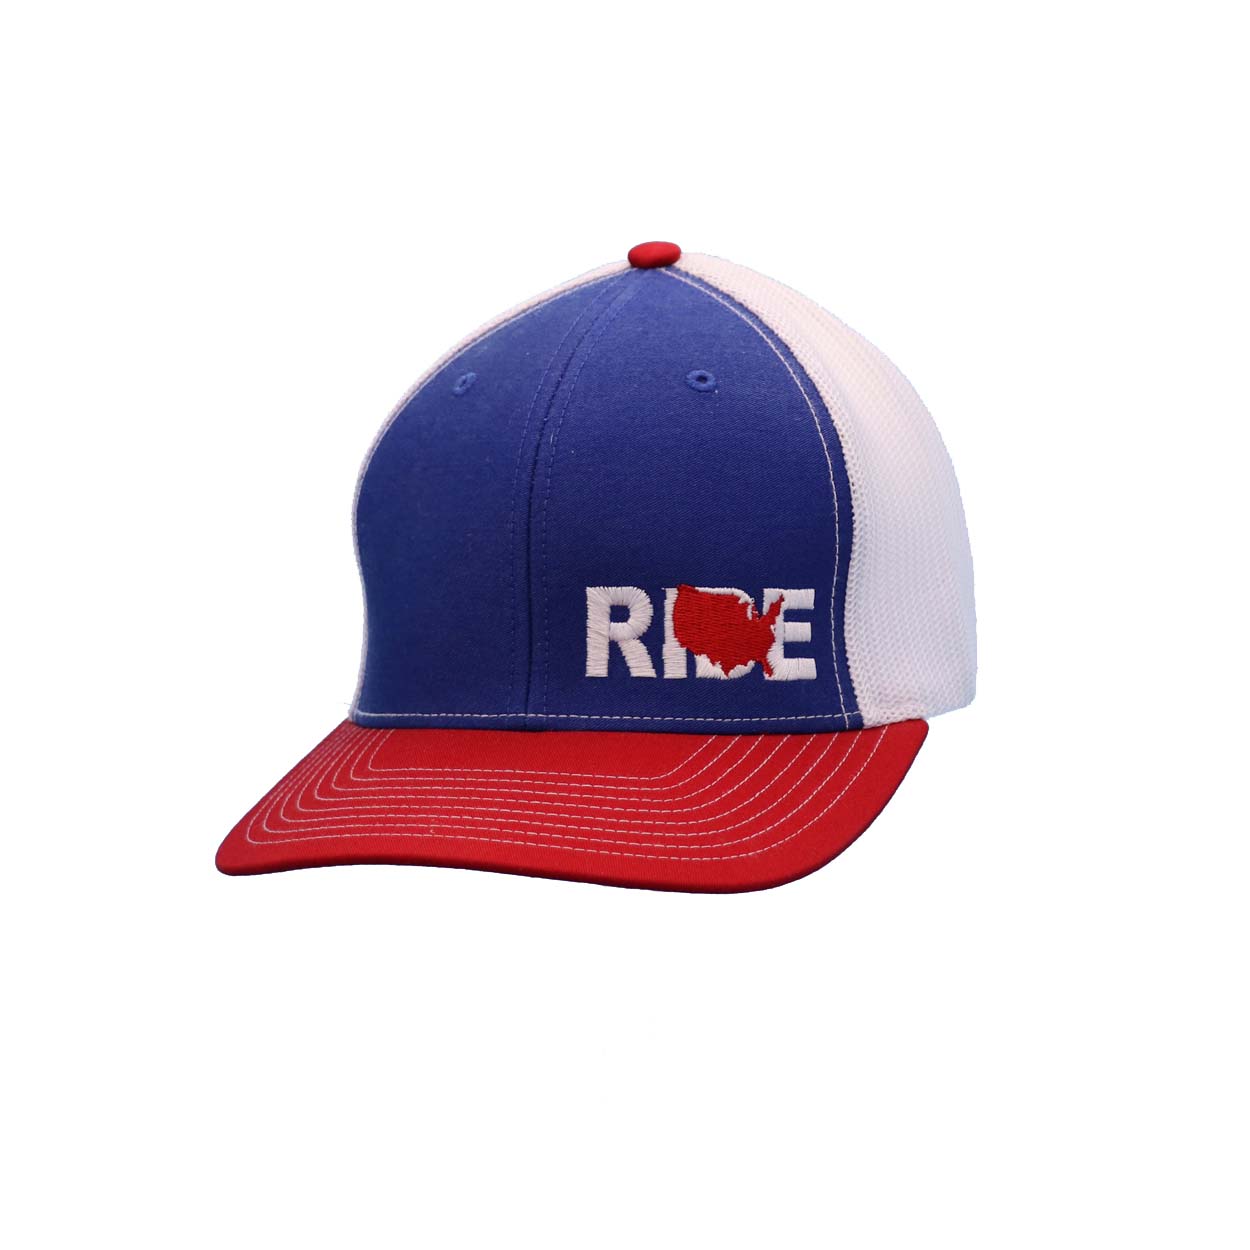 Ride United States Night Out Pro Embroidered Snapback Trucker Hat Red/White/Blue